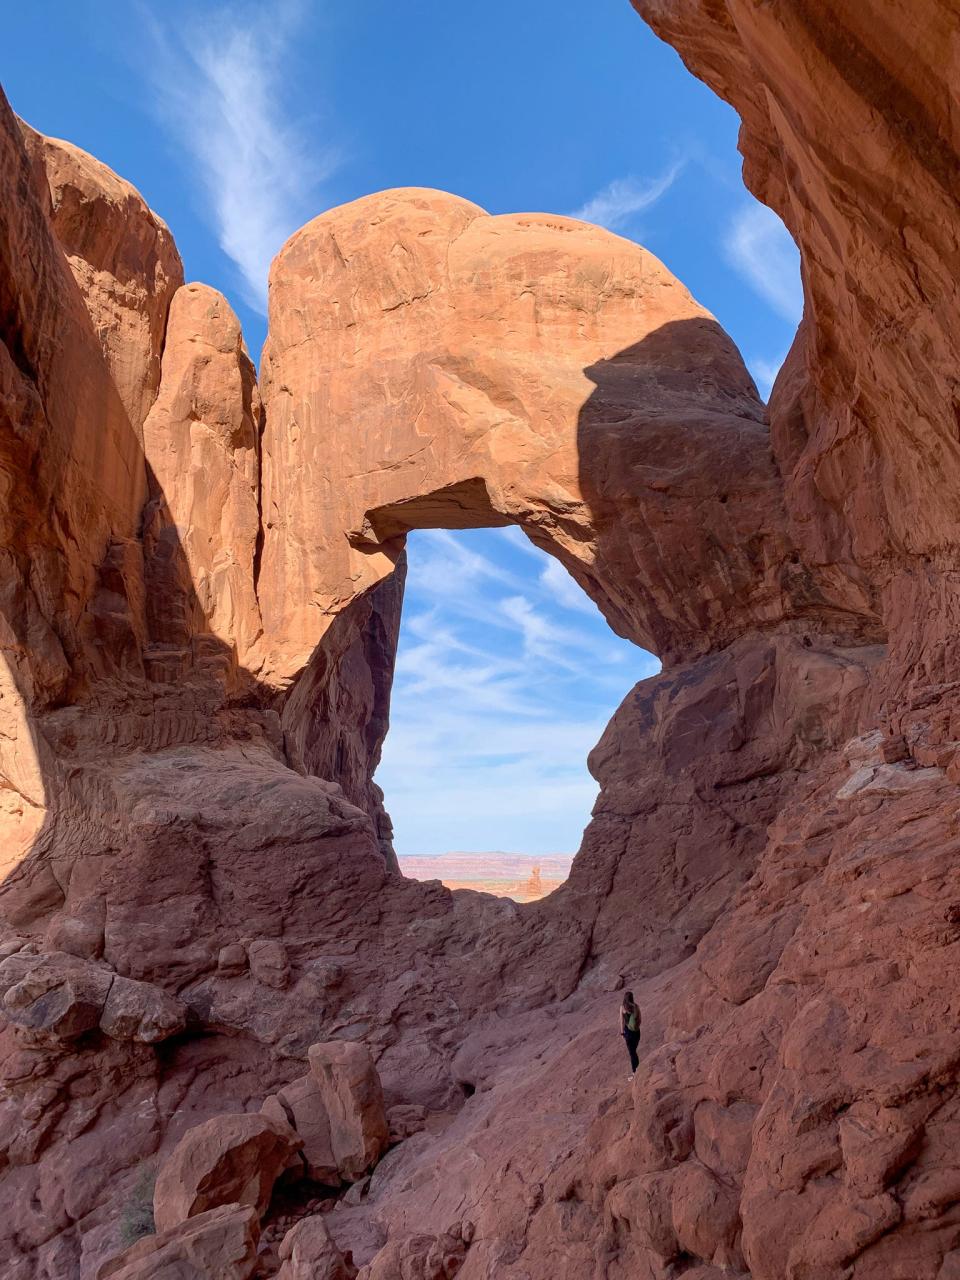 The author under an arch at Arches National Park.